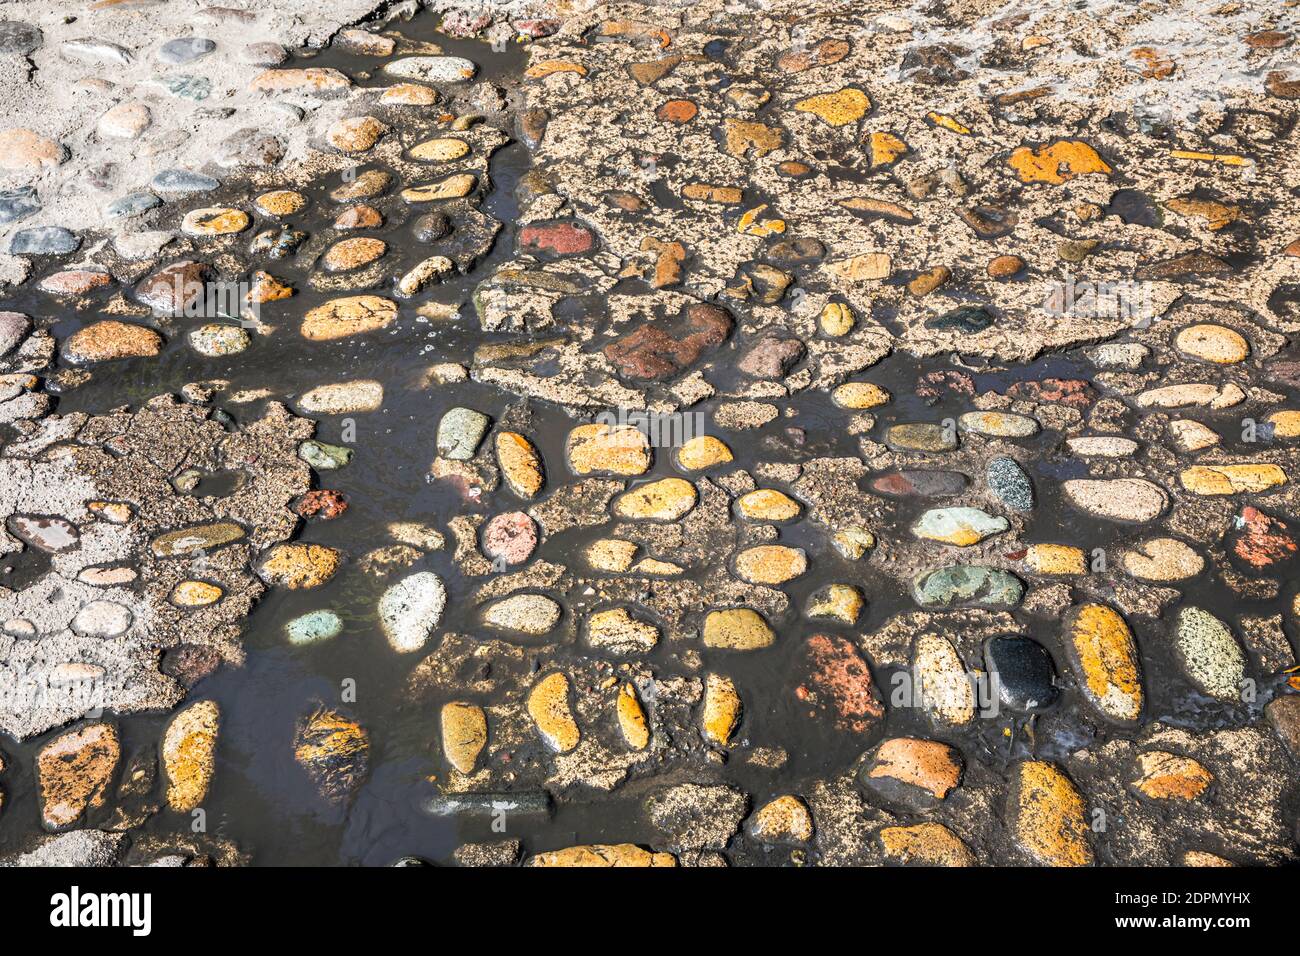 A wet section of rock and concrete street in old Puerto Vallarta, Jalisco, Mexico. Stock Photo